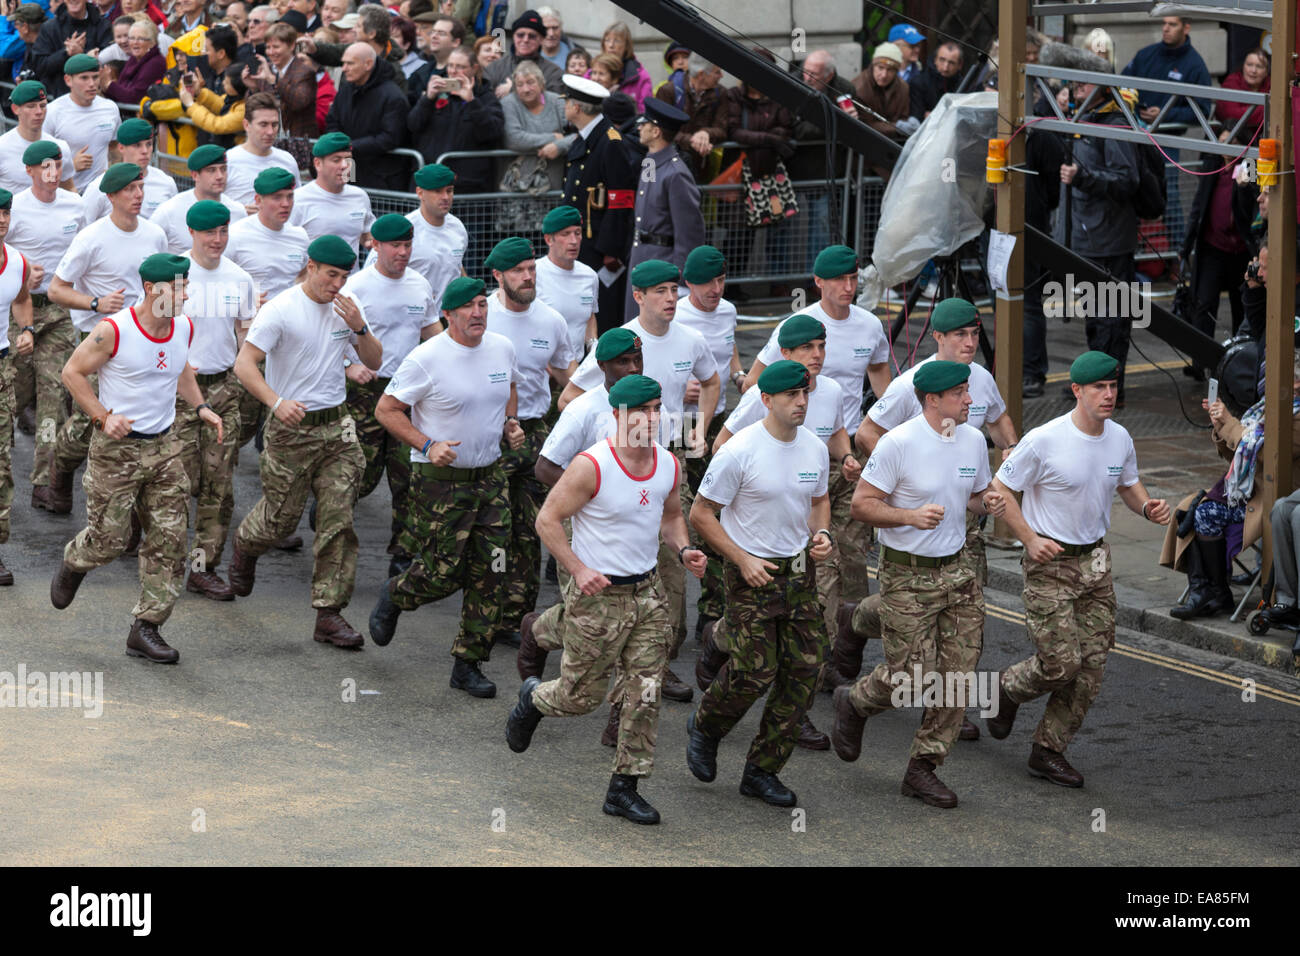 8th November 2014, Lord Mayor's Show, City of London, London, UK. Members of Commando 999, a charity to raise funds for the Royal Marines, speed marching along the route at Mansion House. The Lord Mayor's Show is the oldest civil procession in the world, it celebrates the start of a one-year term for the new Mayor of the City of London. Stock Photo